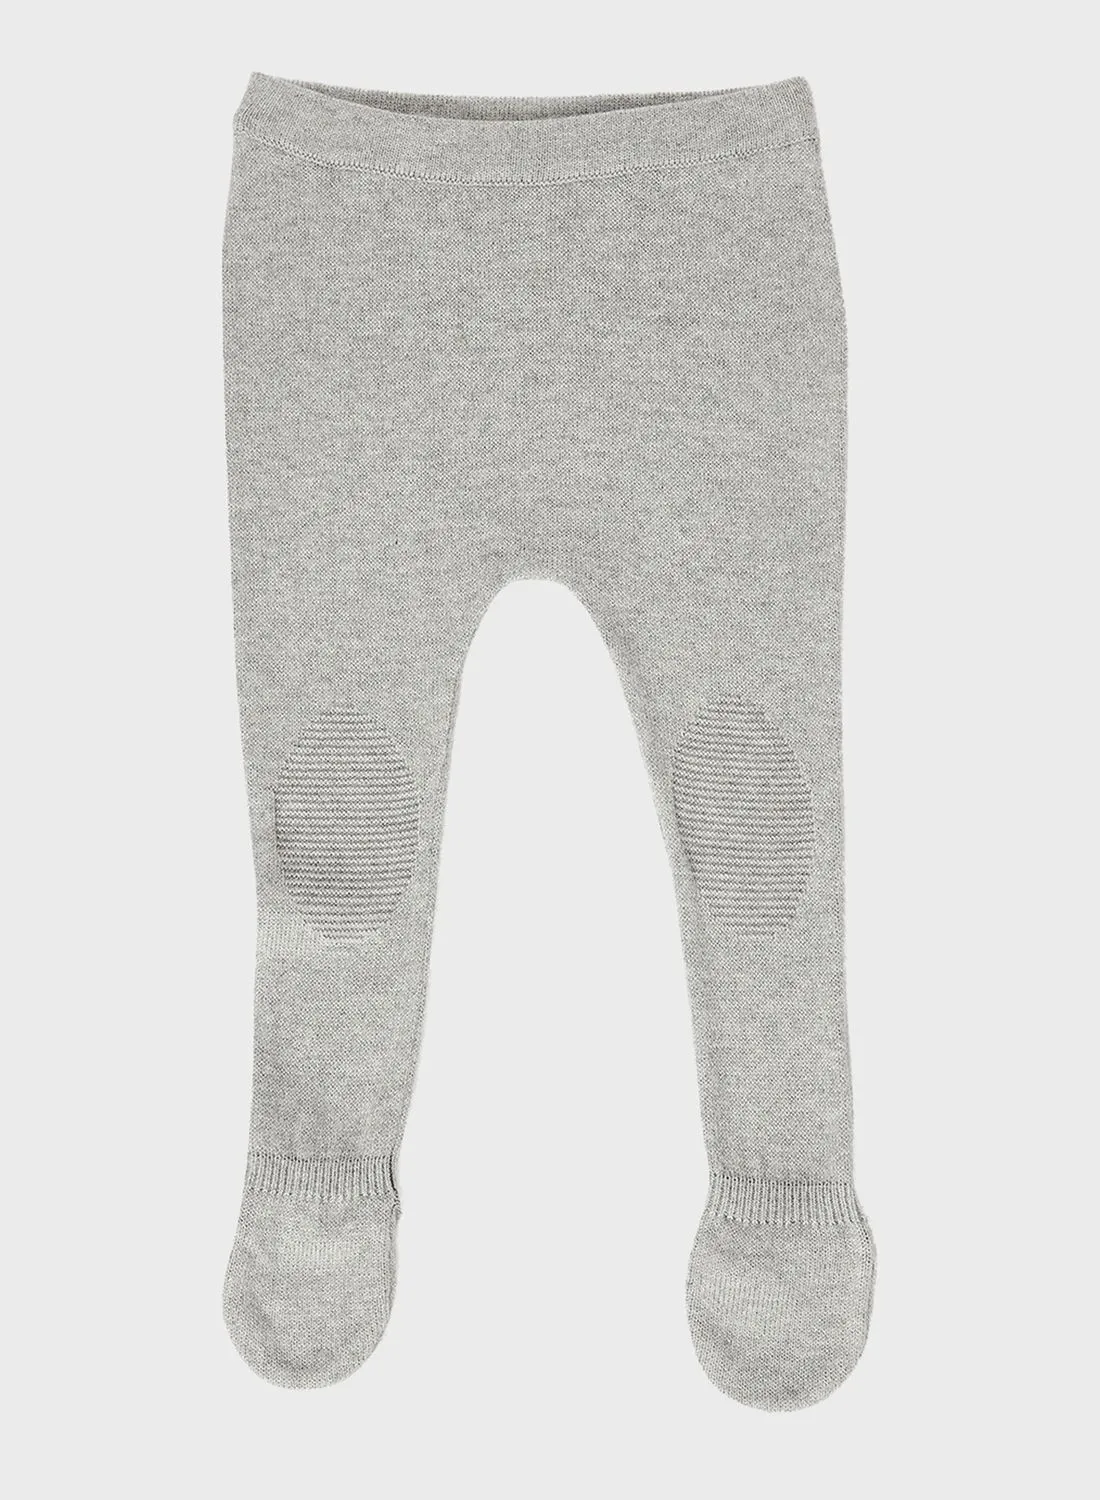 MANGO Infant Knit Footed Pants